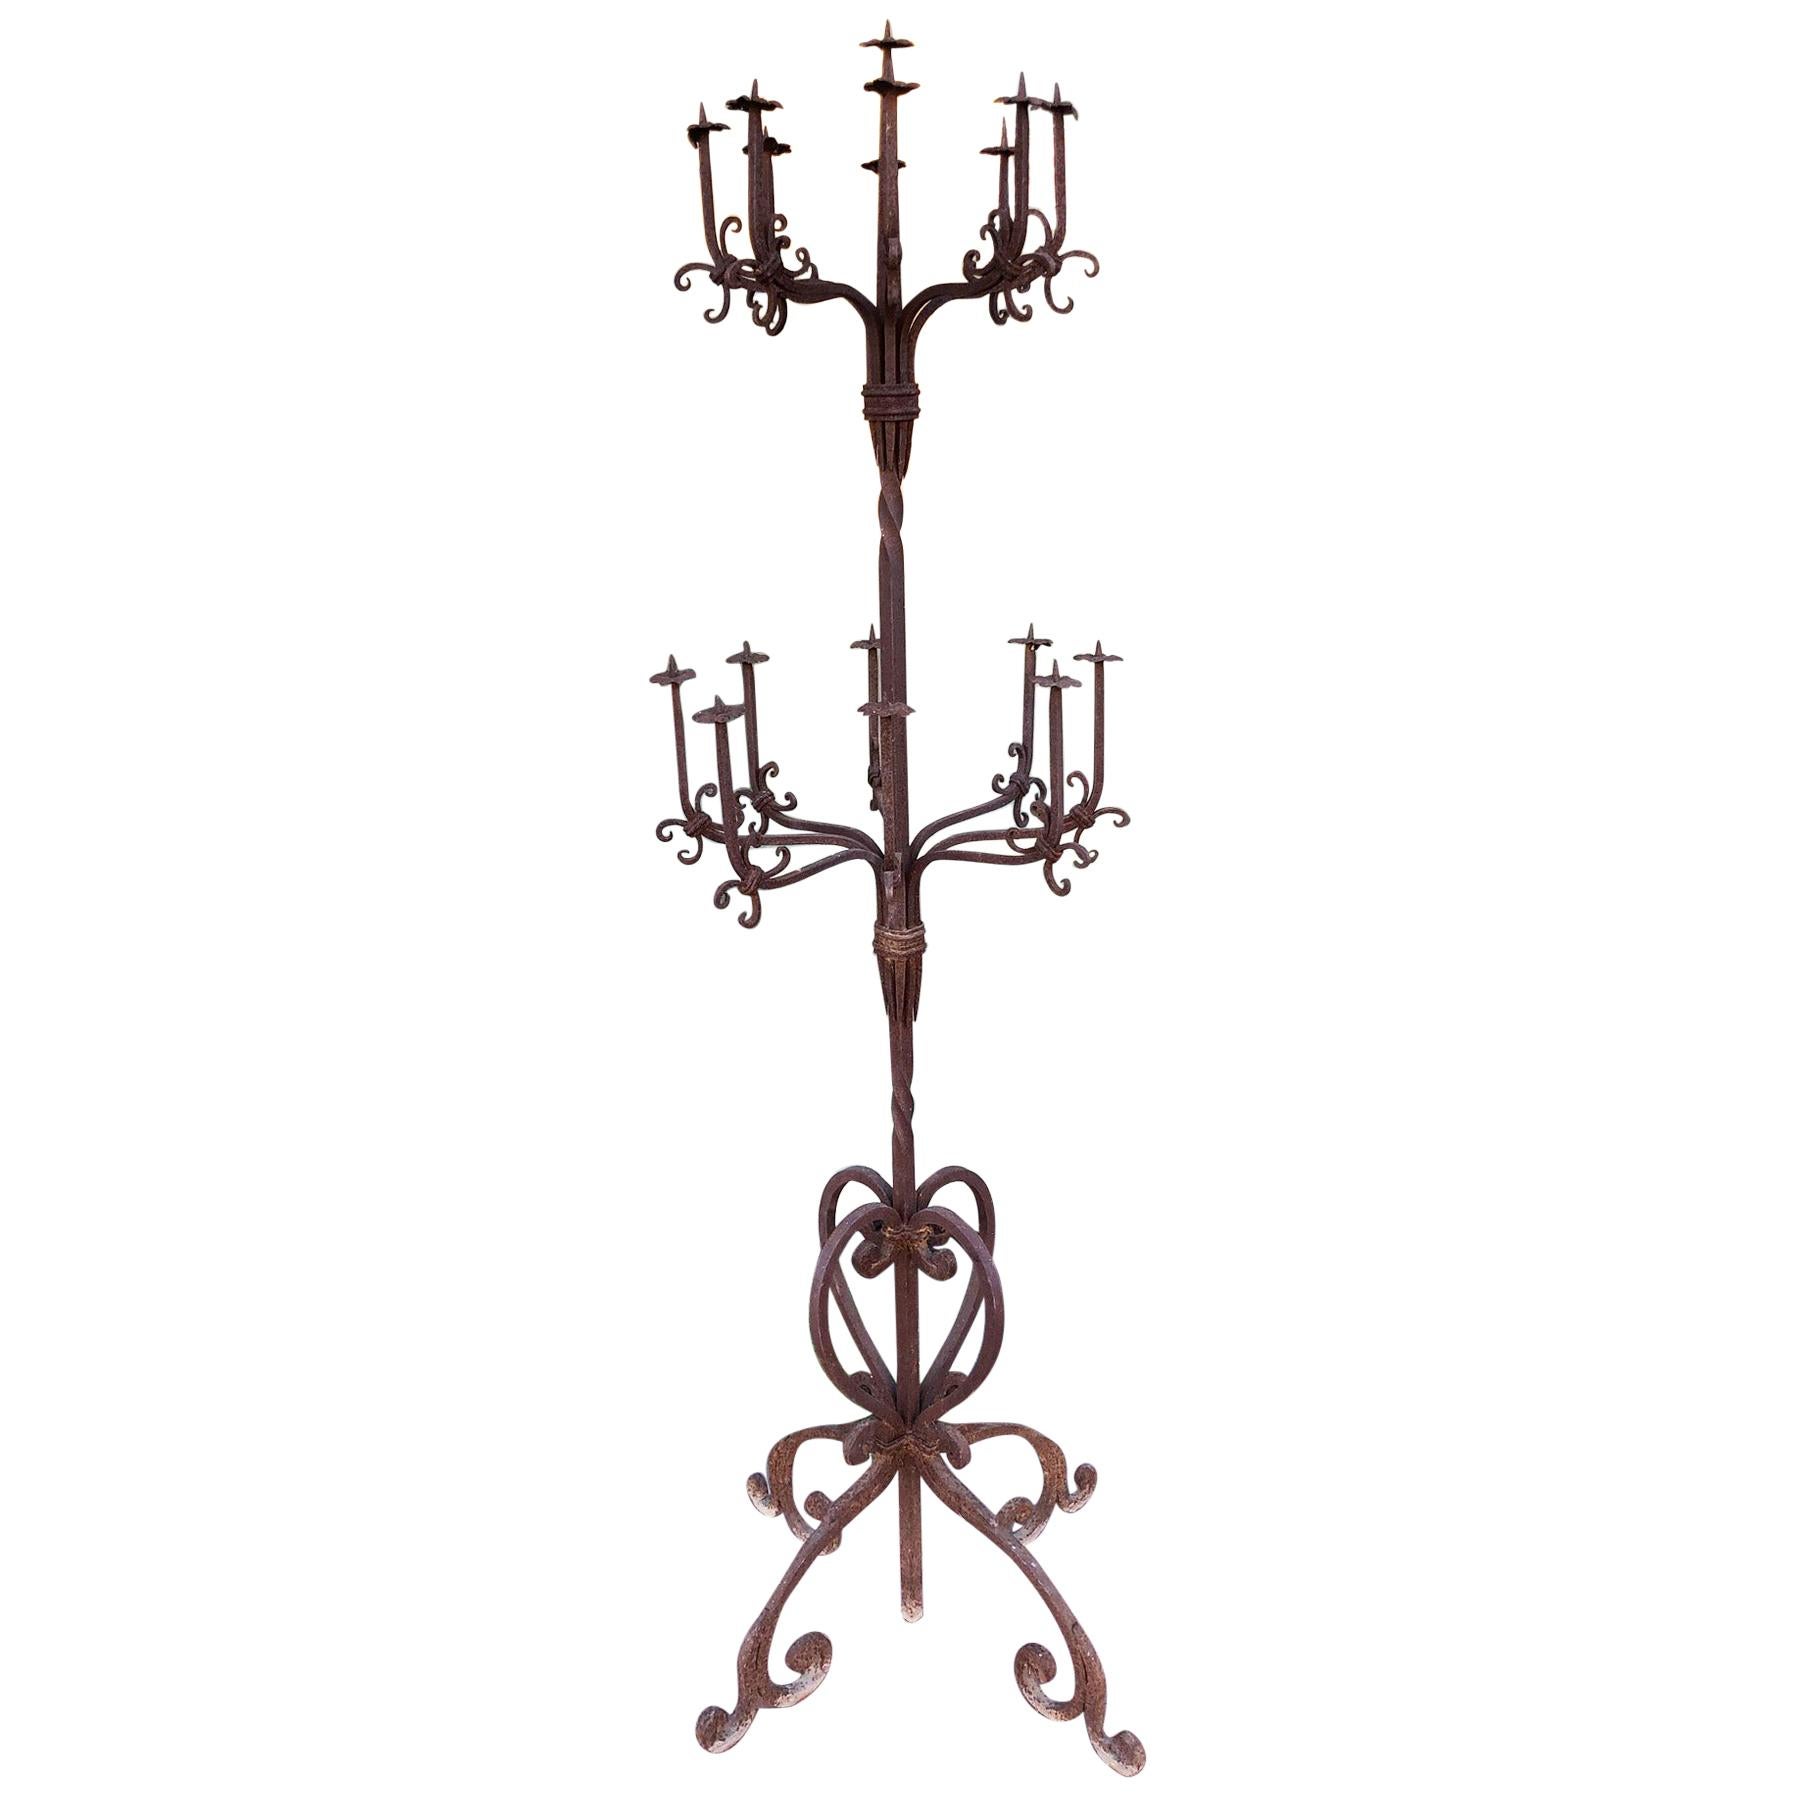 20th Century Antique 17-Place Candleholder in Wrought Iron Design